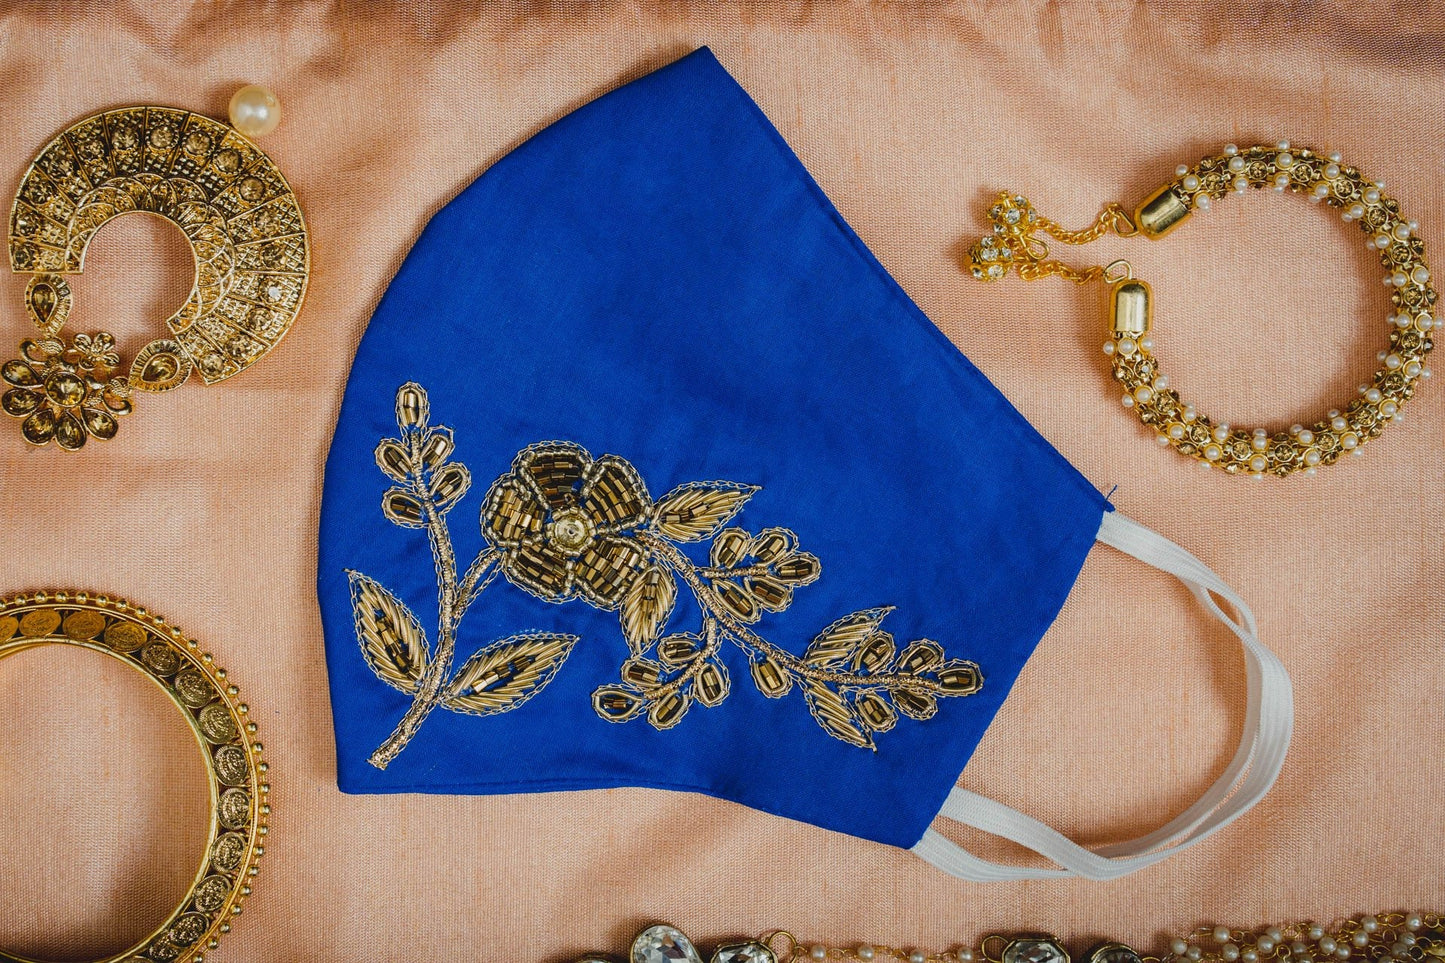 Petal Textured Embroidery on Royal Blue Cotton Face Mask - Maxim Creation